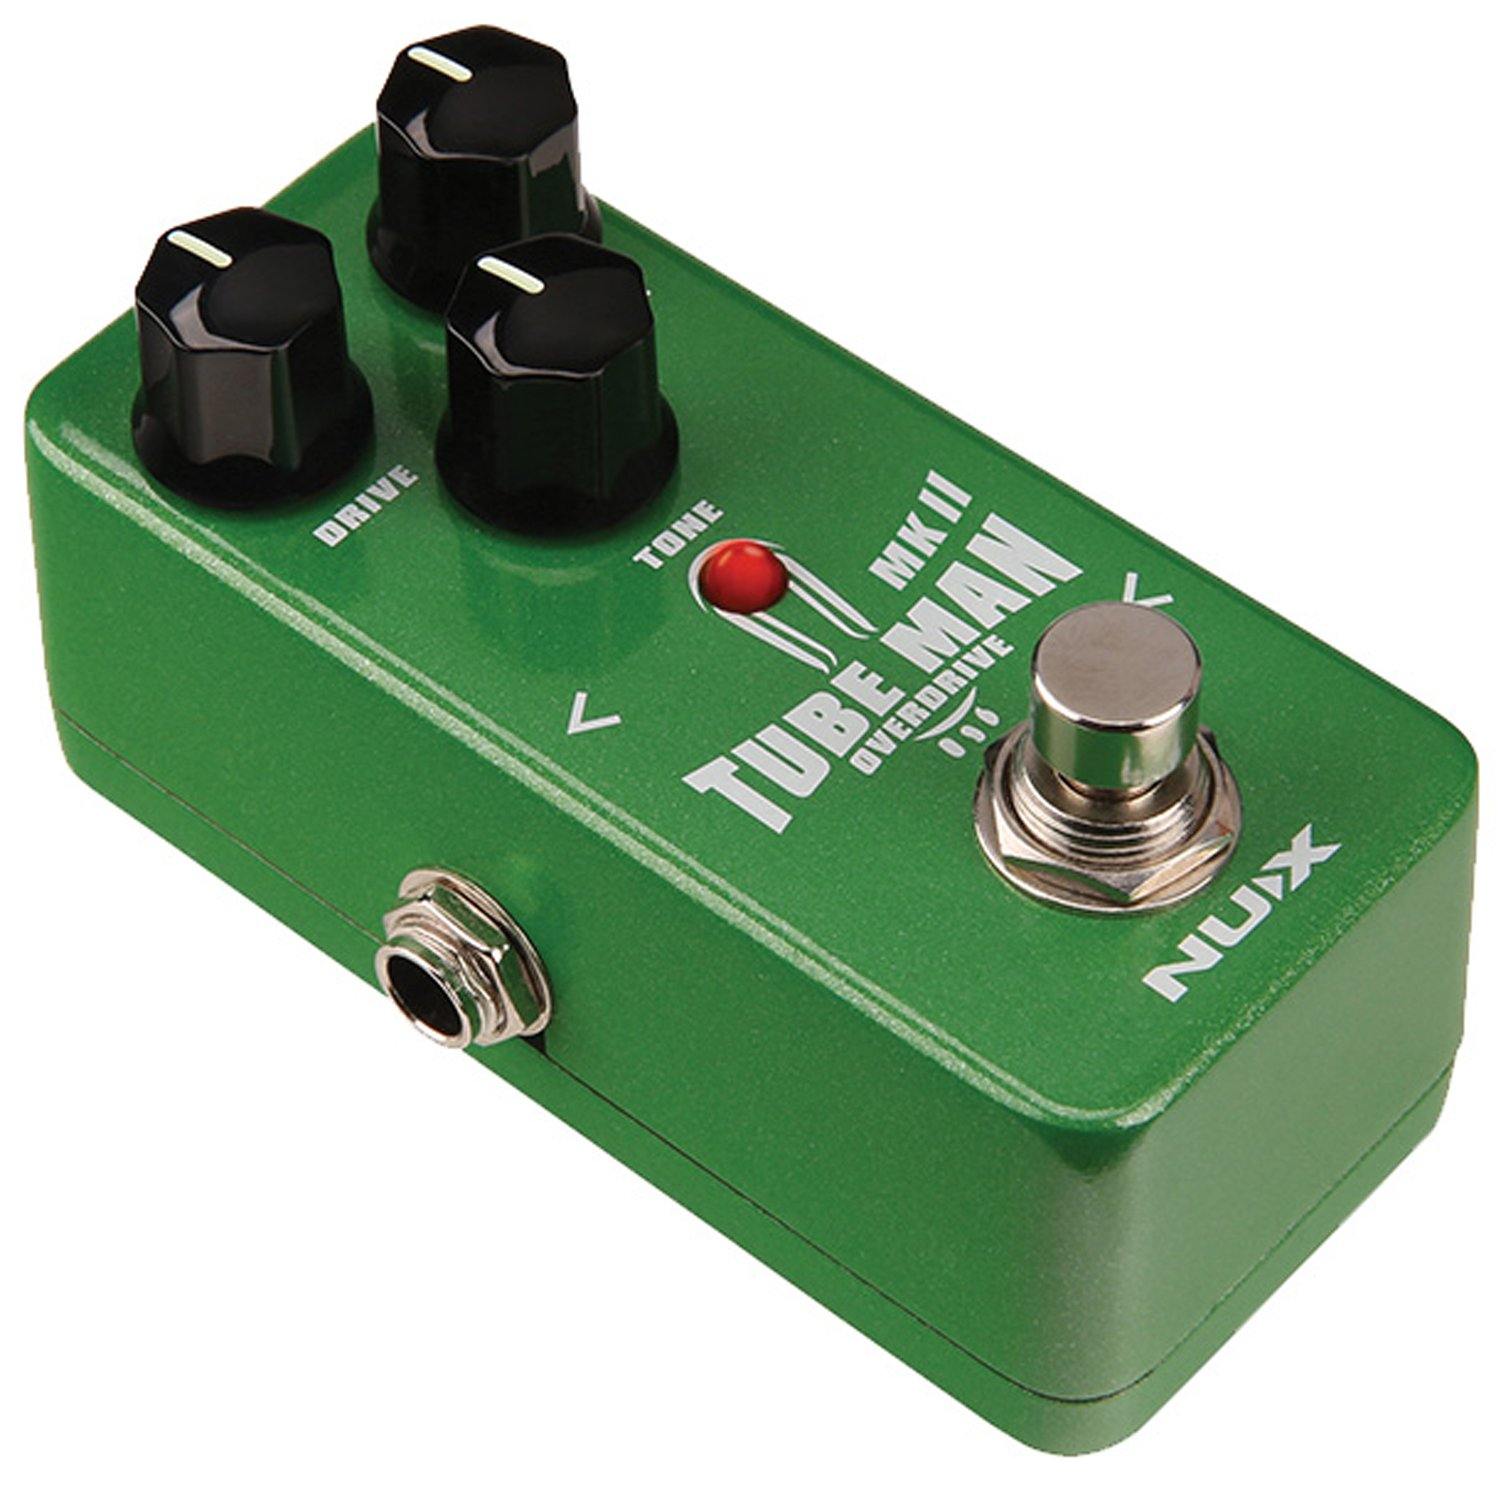 NUX Tube Man MKII Overdrive Pedal - DY Pro Audio